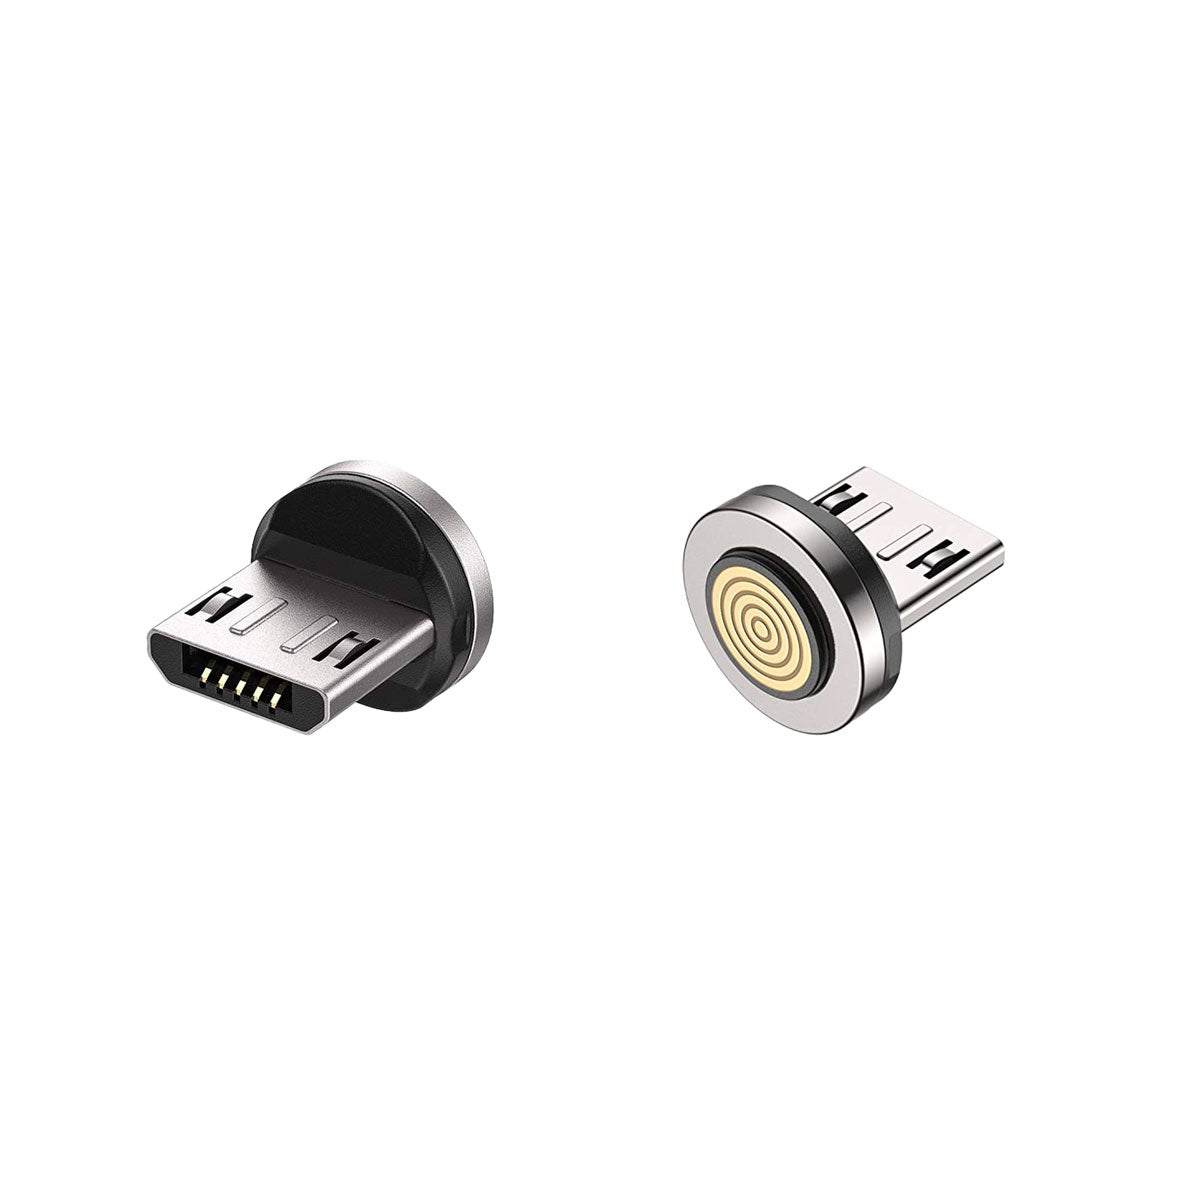 Extra Connectors for Magnilink PRO - Pack of 2